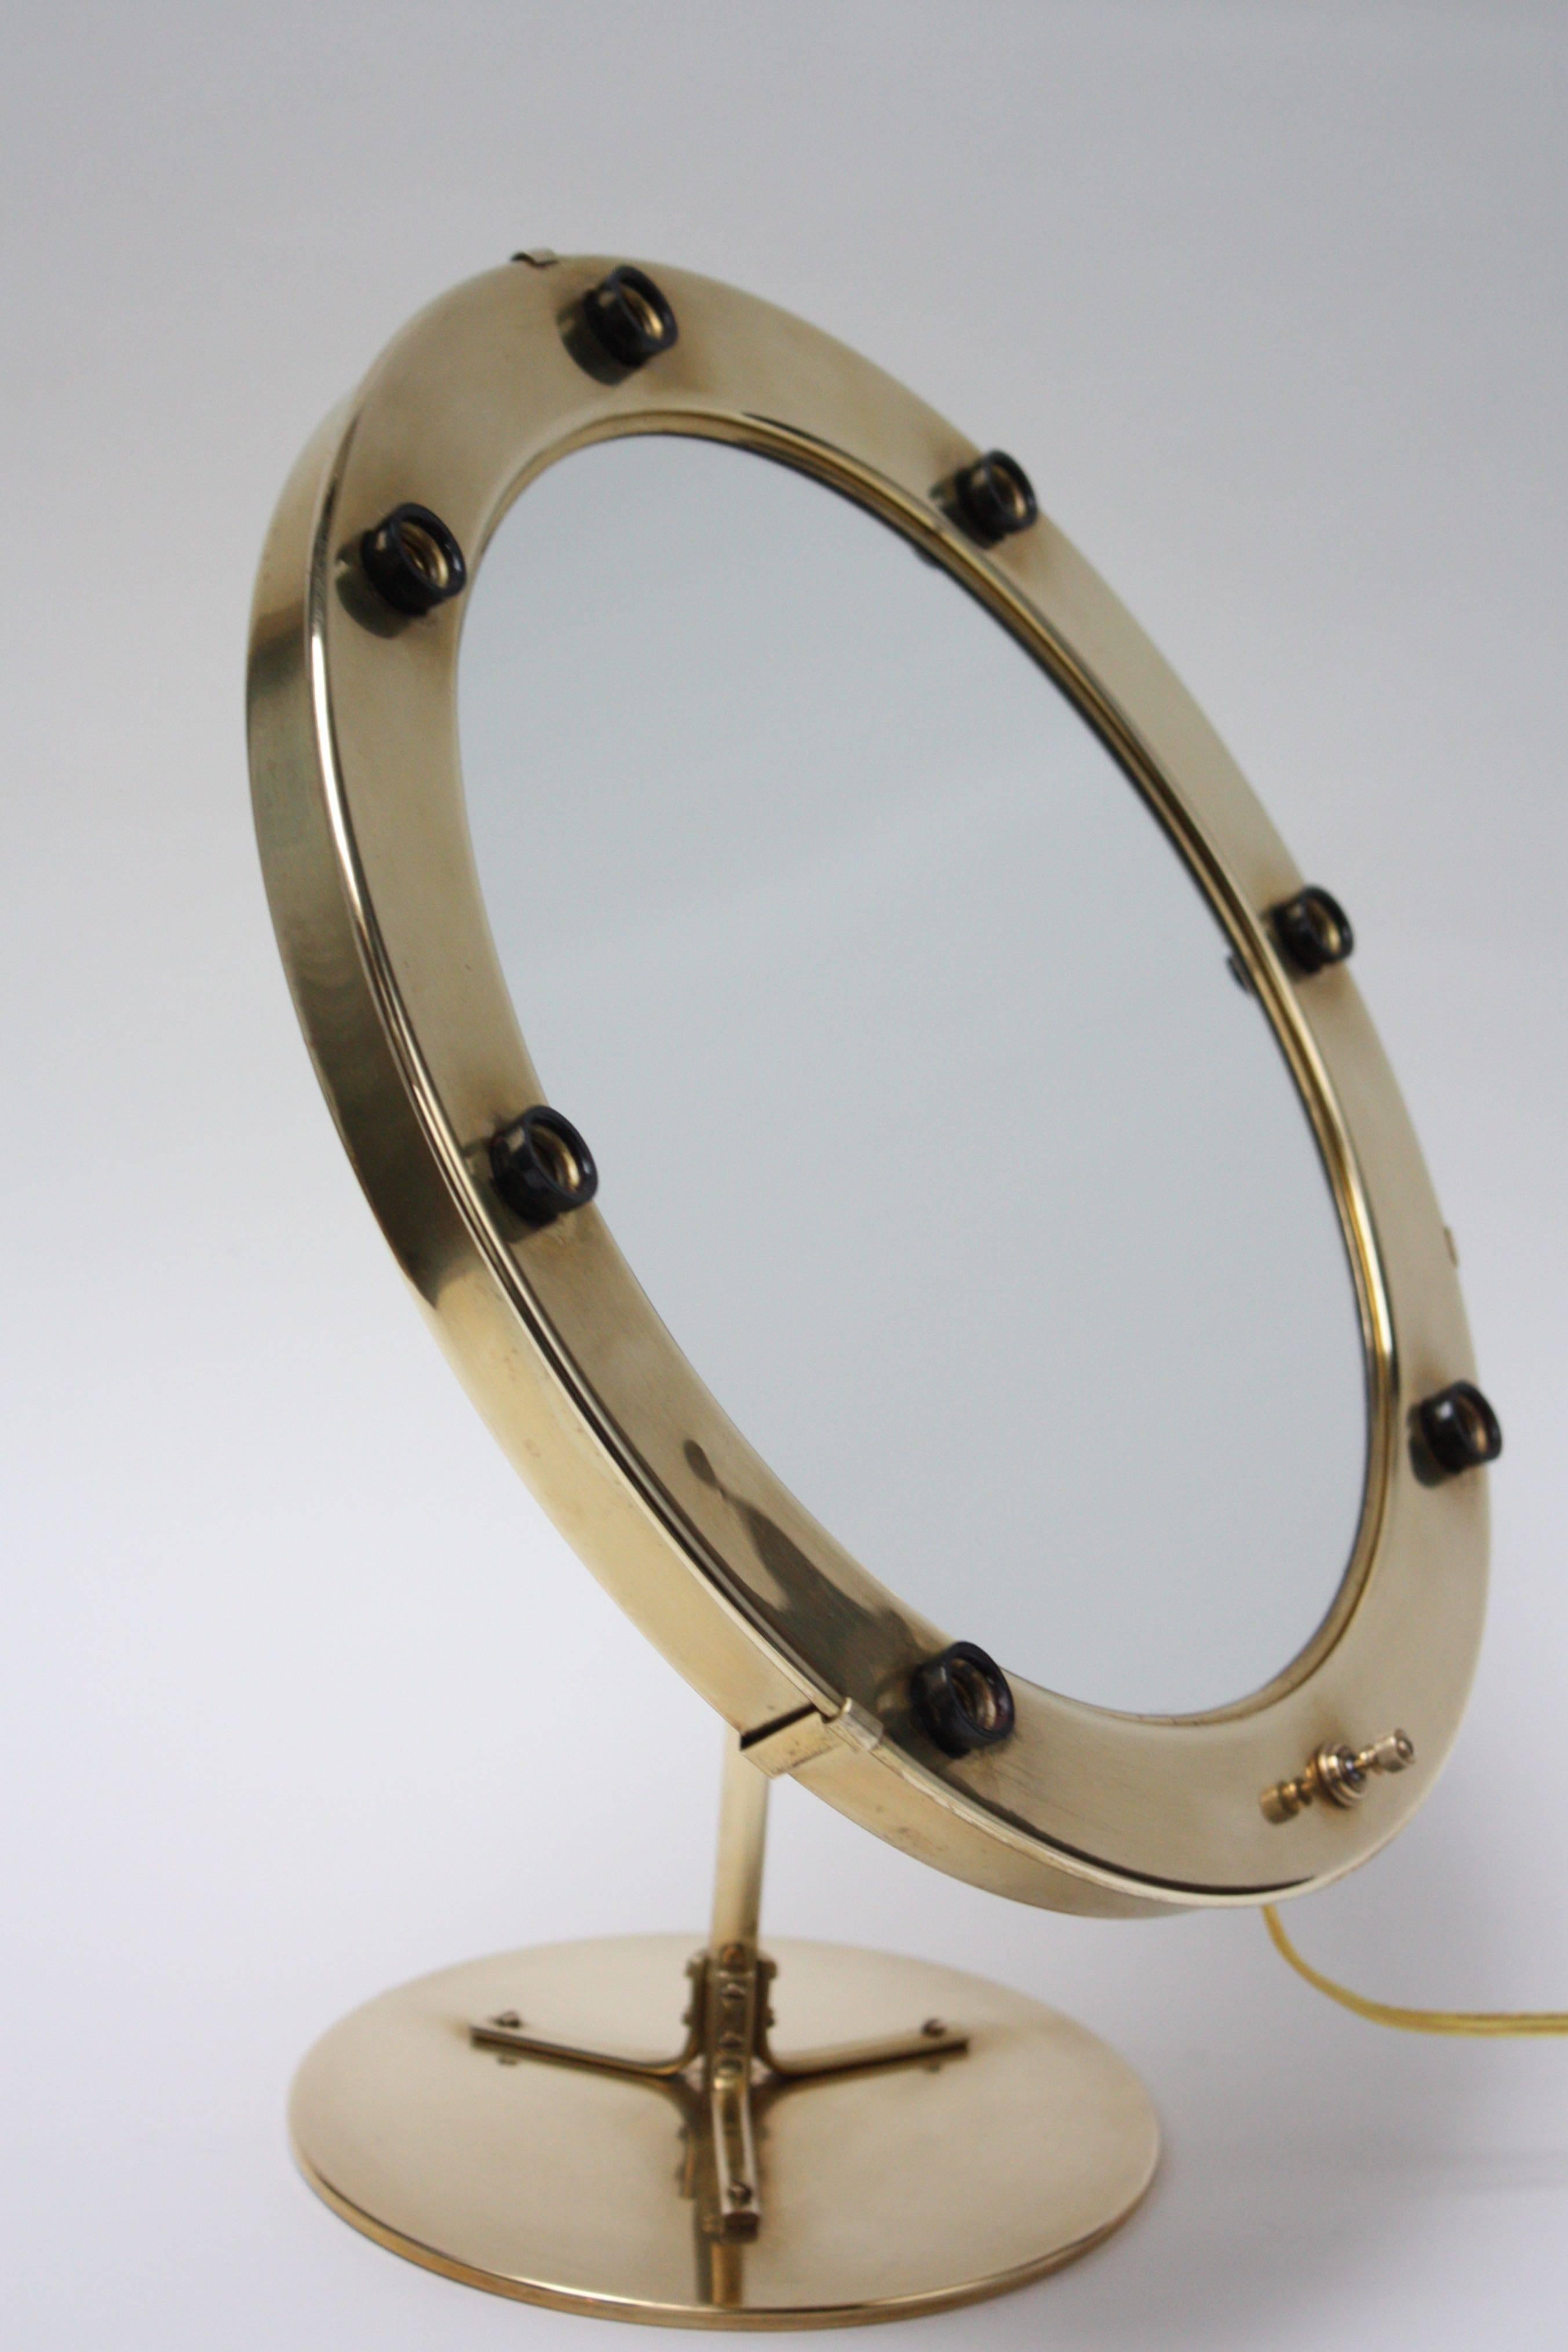 1960s seven-fixture illuminated mirror in solid brass. Newly rewired. Signed 'West Germany' to the underside. 
Mirror itself is in excellent shape free of scratches / scuffs. Brass is in beautiful polished condition.